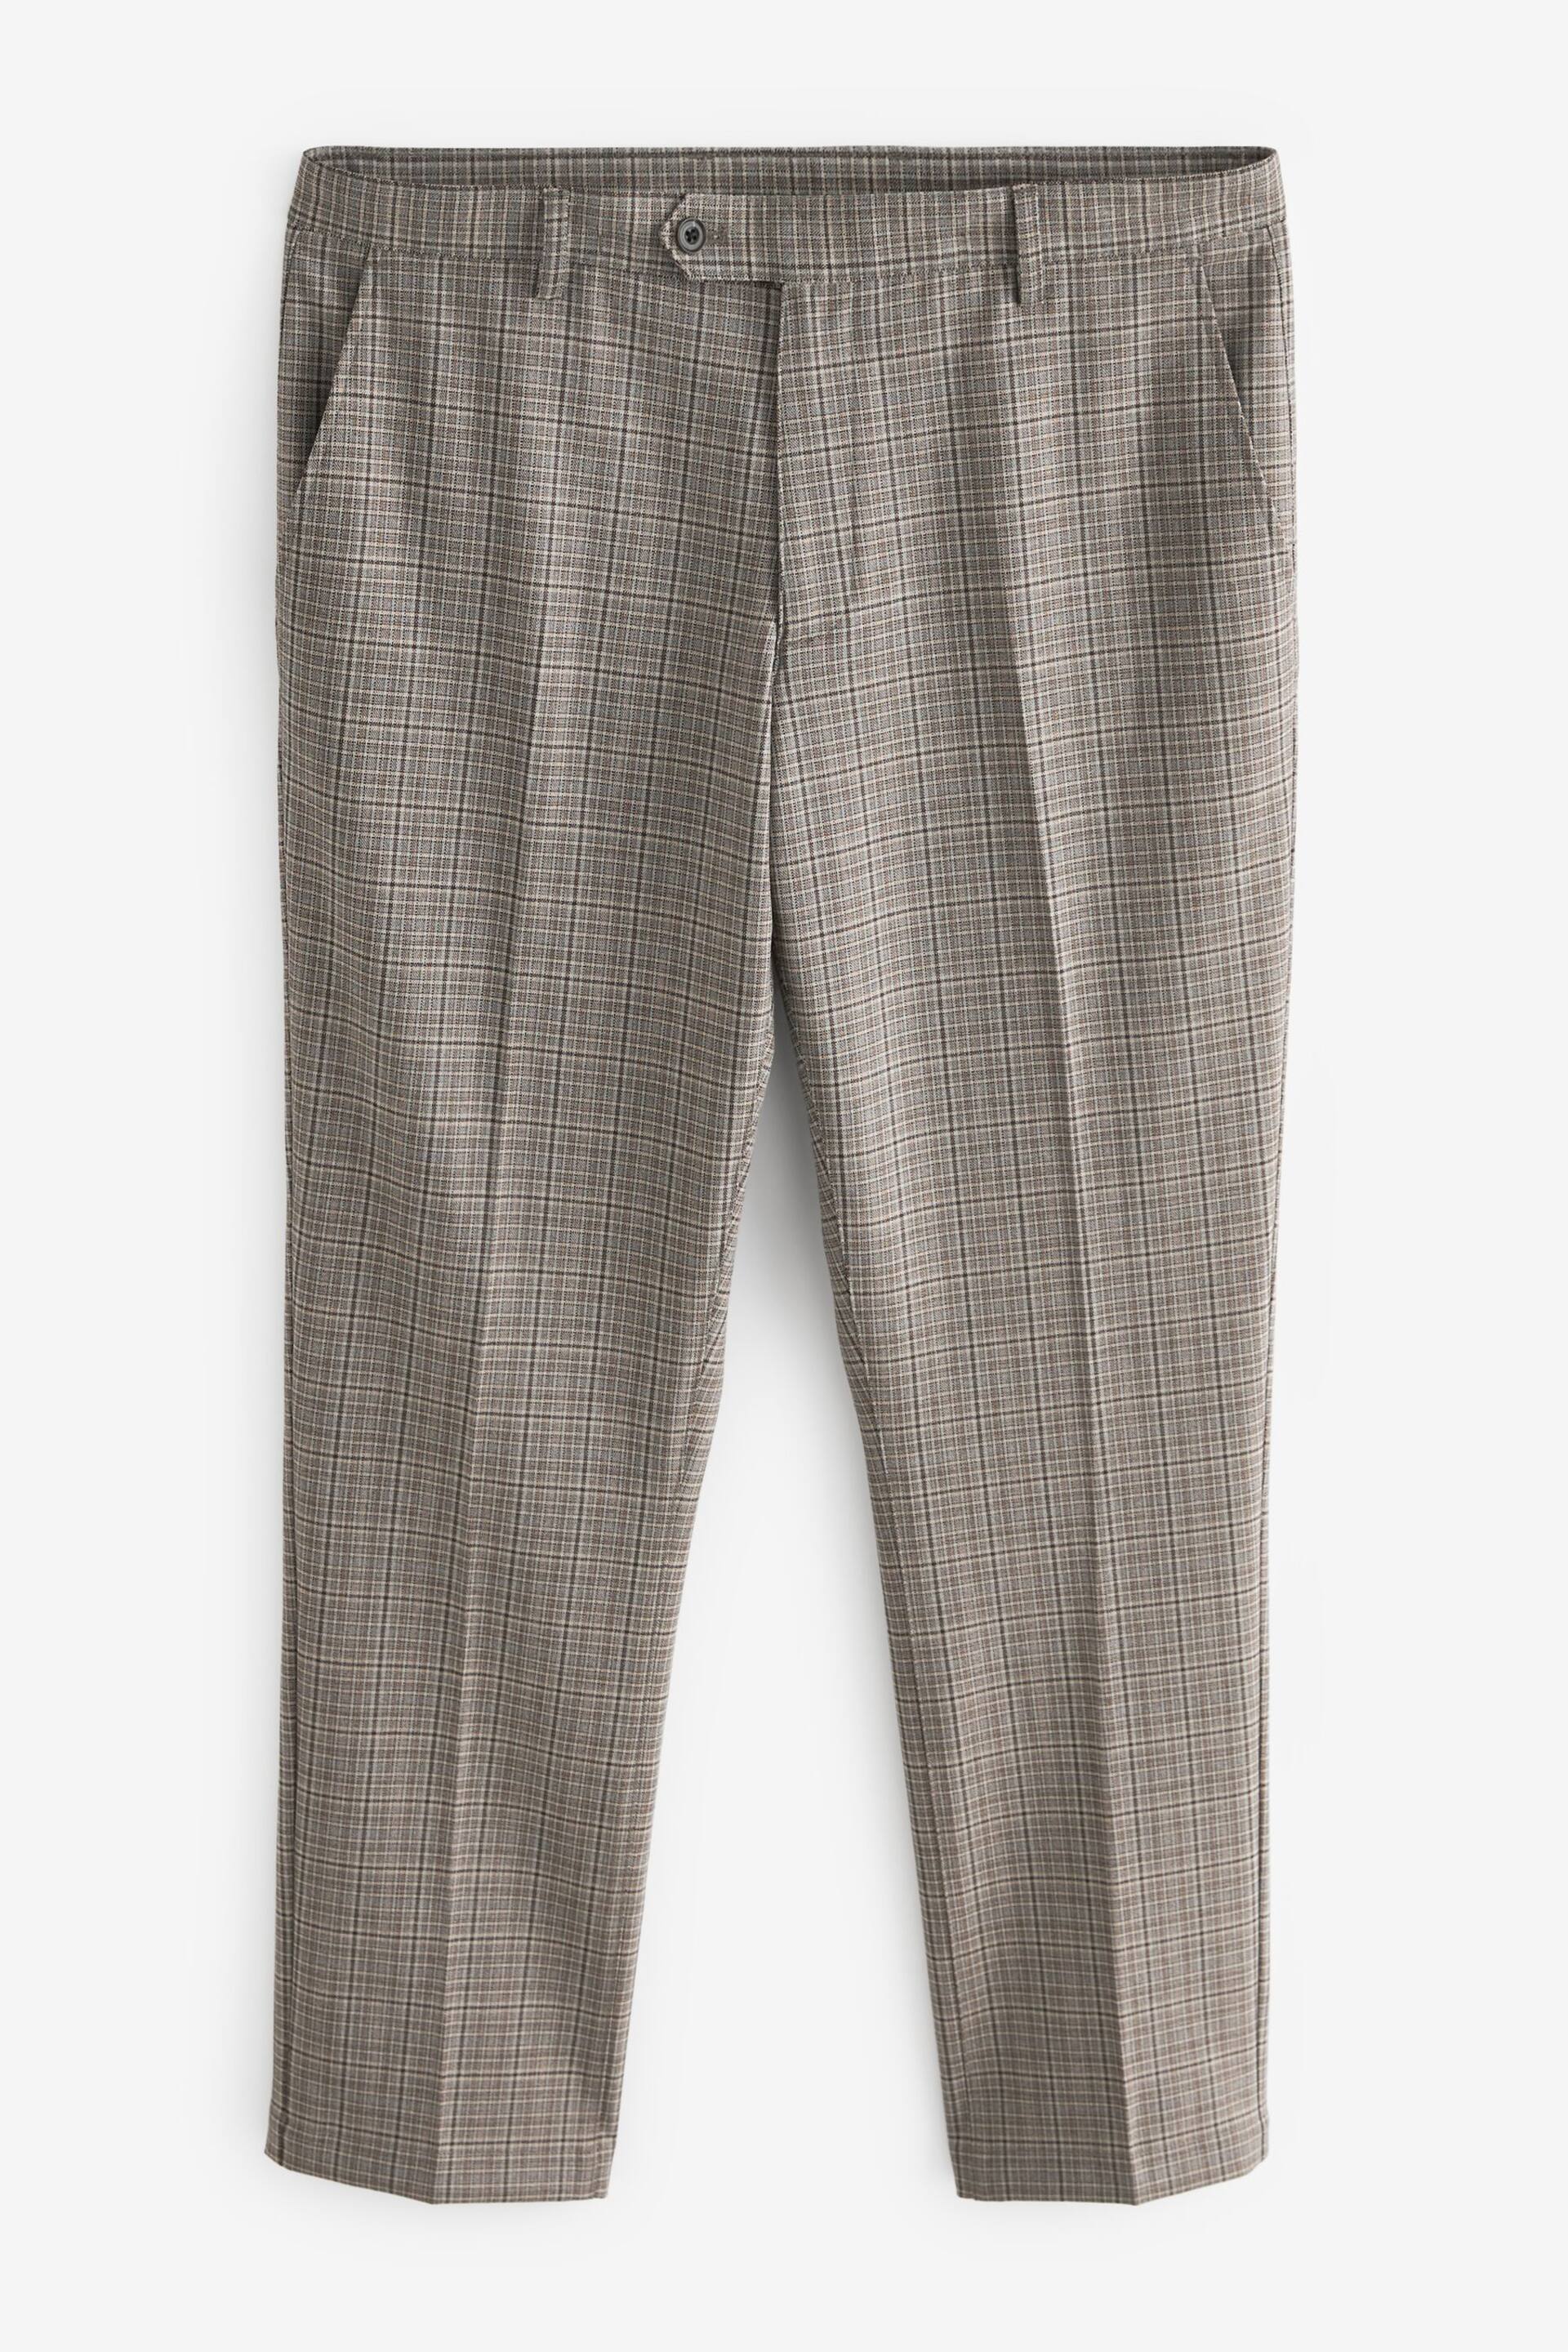 Taupe Skinny Fit Trimmed Check Suit: Trousers - Image 6 of 10